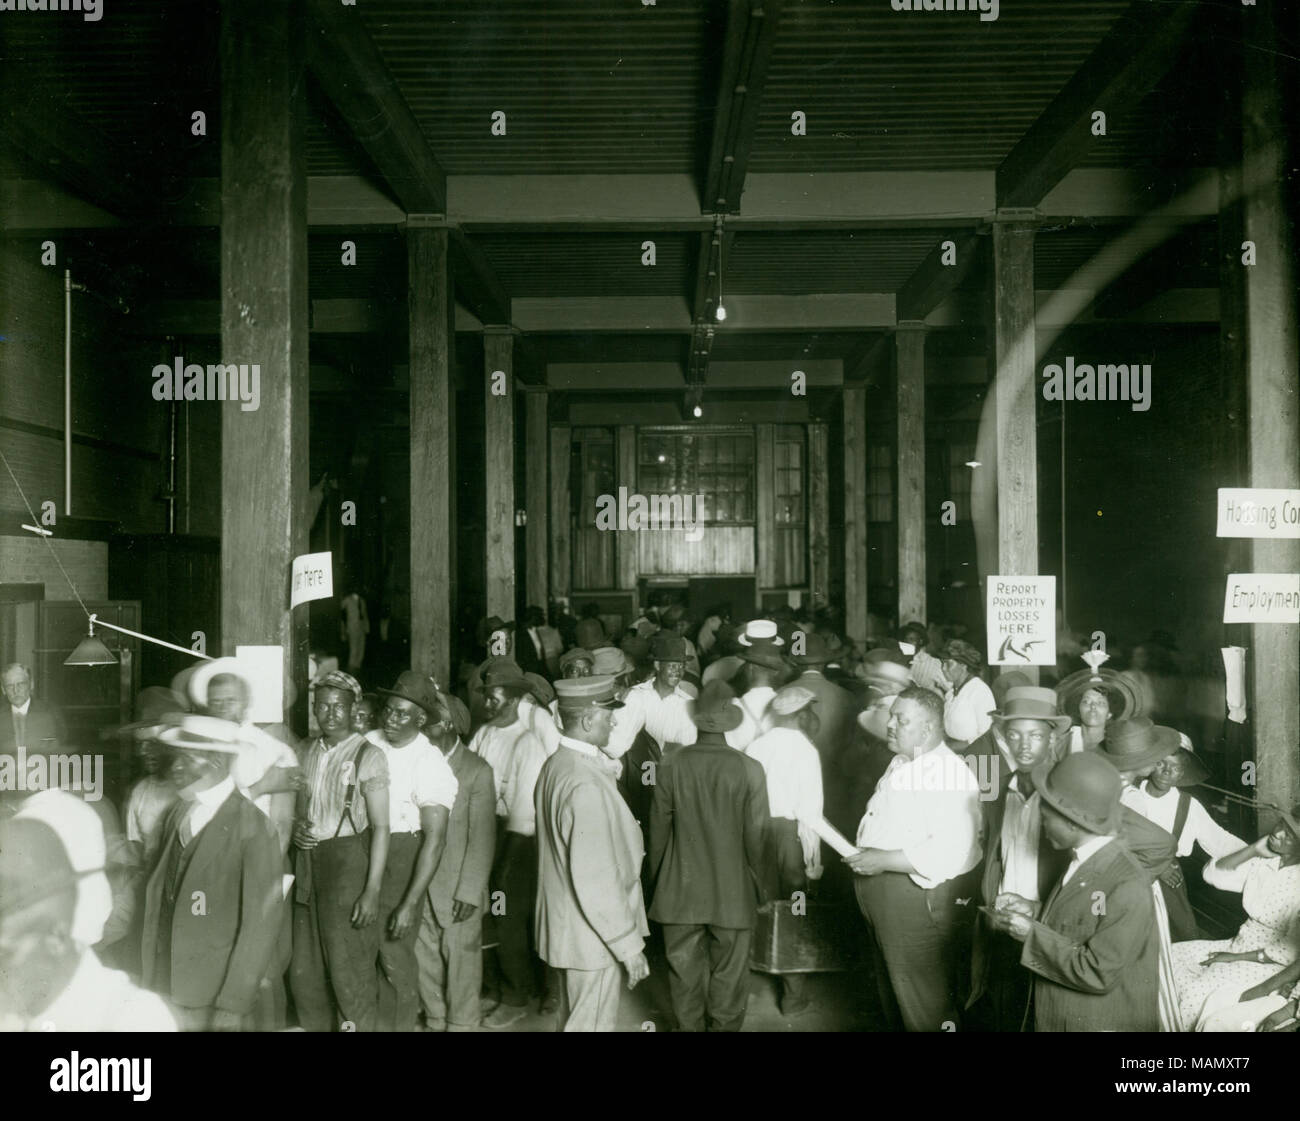 Horizontal, black and white photograph showing a large open room where a group of African Americans, mostly men, There is a large central aisle in the room. Along the left side men are standing in a line, in the center people are exiting the room, and along the right side people are seated or waiting. There are some signs posted on poles in the room reading 'Report Property Losses Here', 'Housing Con[ditions]', and 'Employment.' The photograph was possibly taken at the Municipal Lodging House (110 South 12th Street). Title: Group of African American men reporting property losses around time of Stock Photo